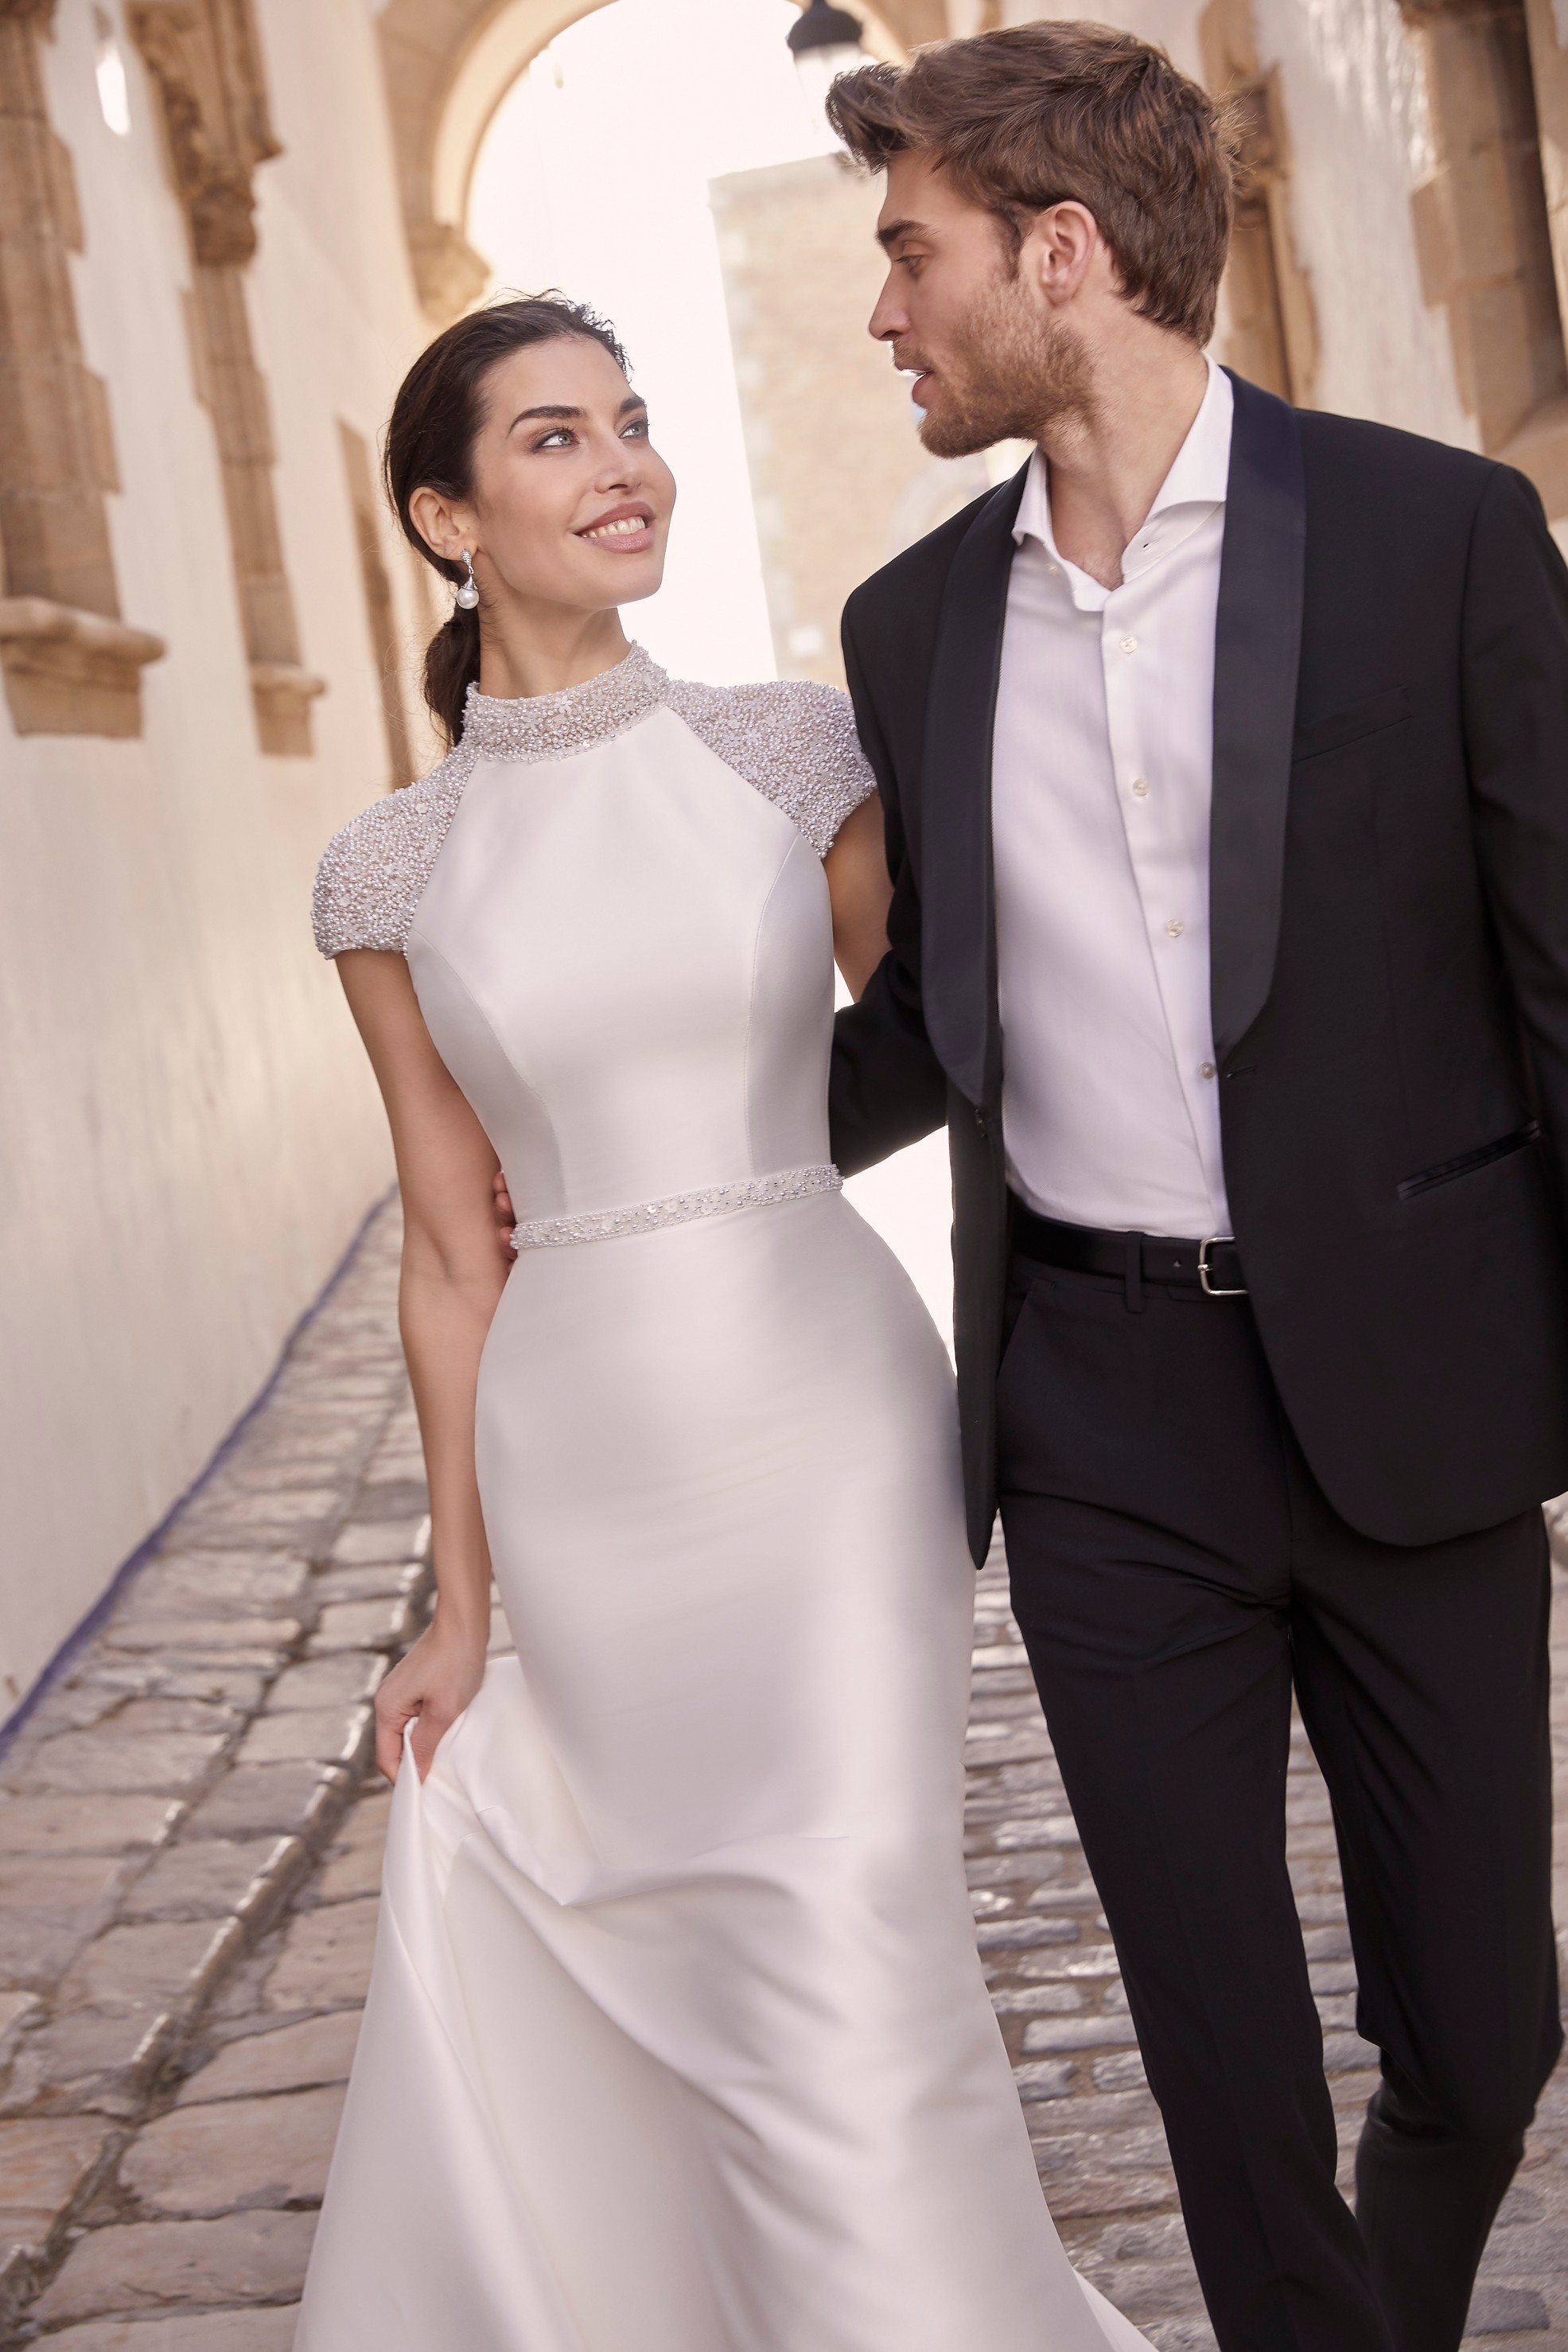 Man and woman walking down quaint backstreet while woman wears mikado fit and flare wedding dress with beaded cap sleeves and embellished waist belt